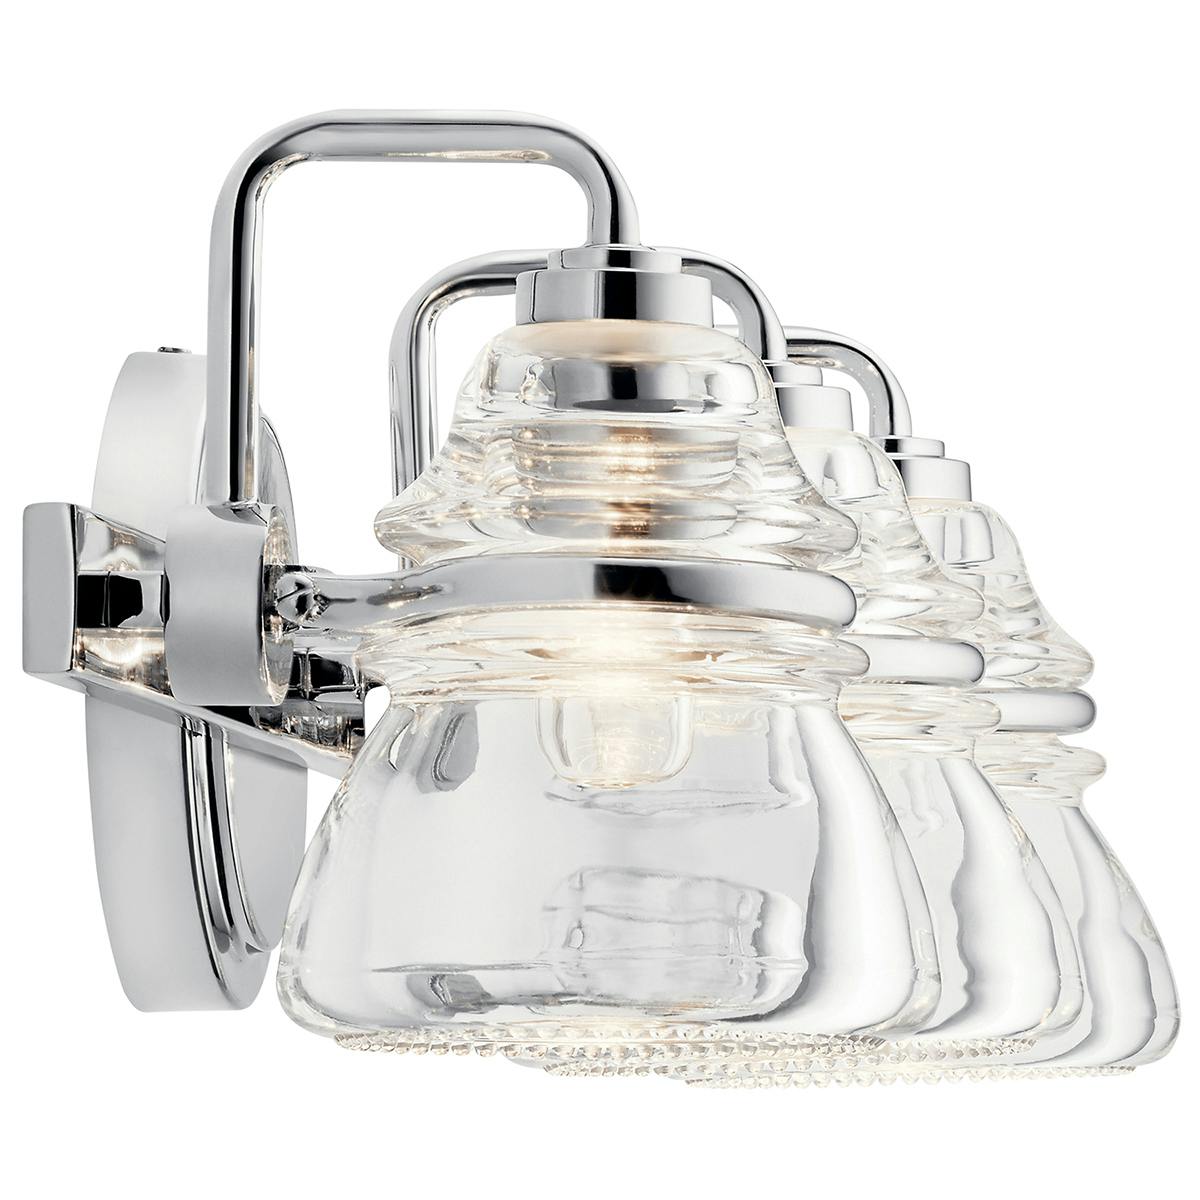 Profile view of the Talland 3 Light Vanity Light Chrome on a white background